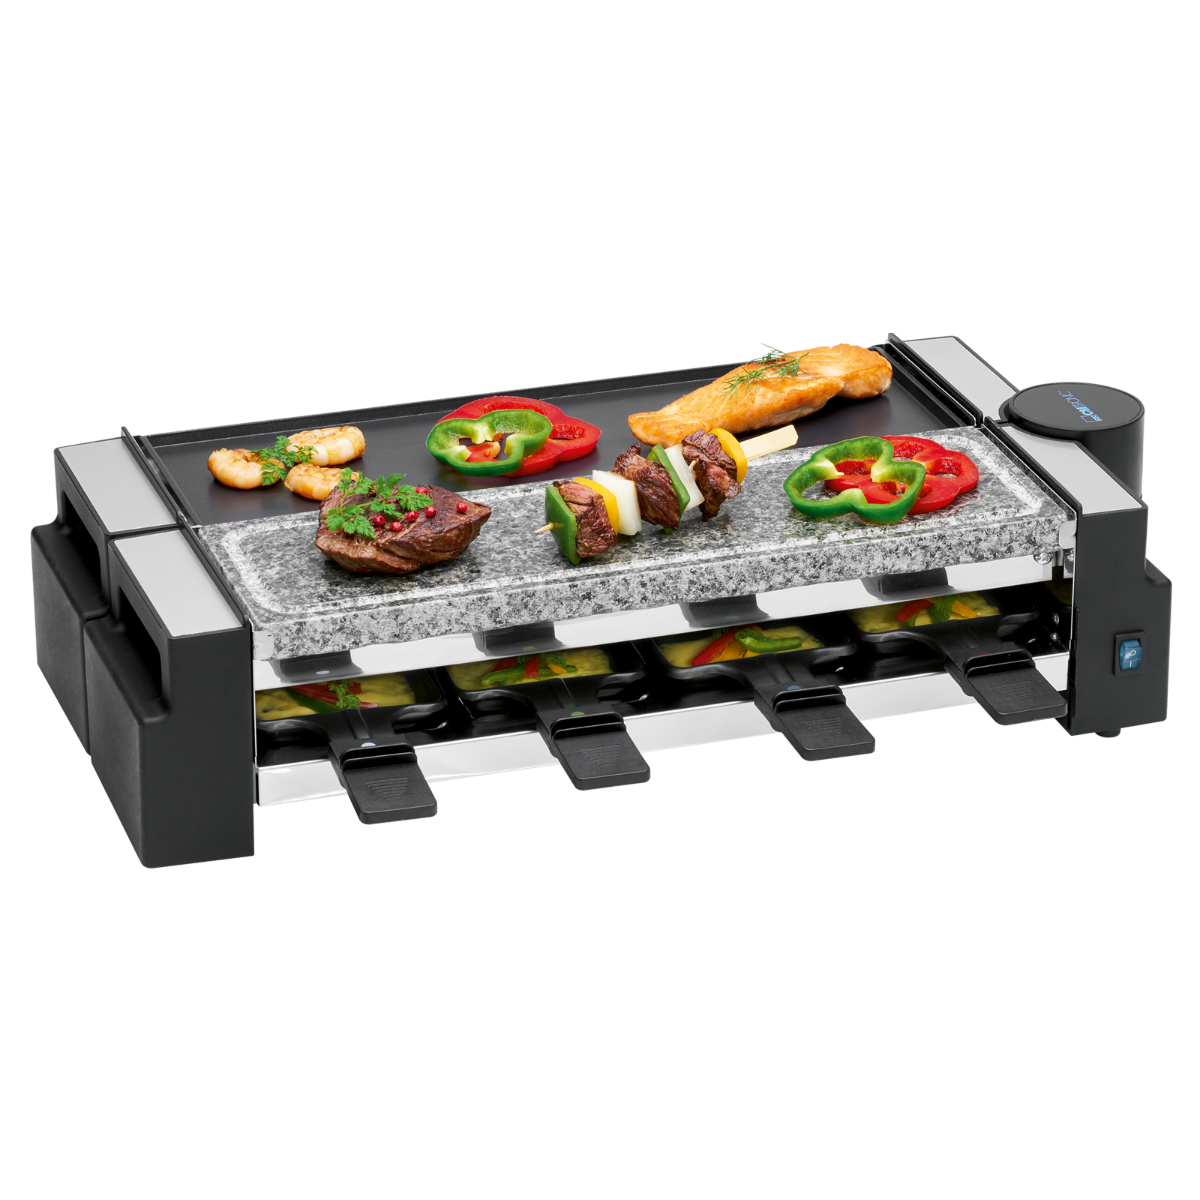 3678 Raclette-Grill RG CLATRONIC